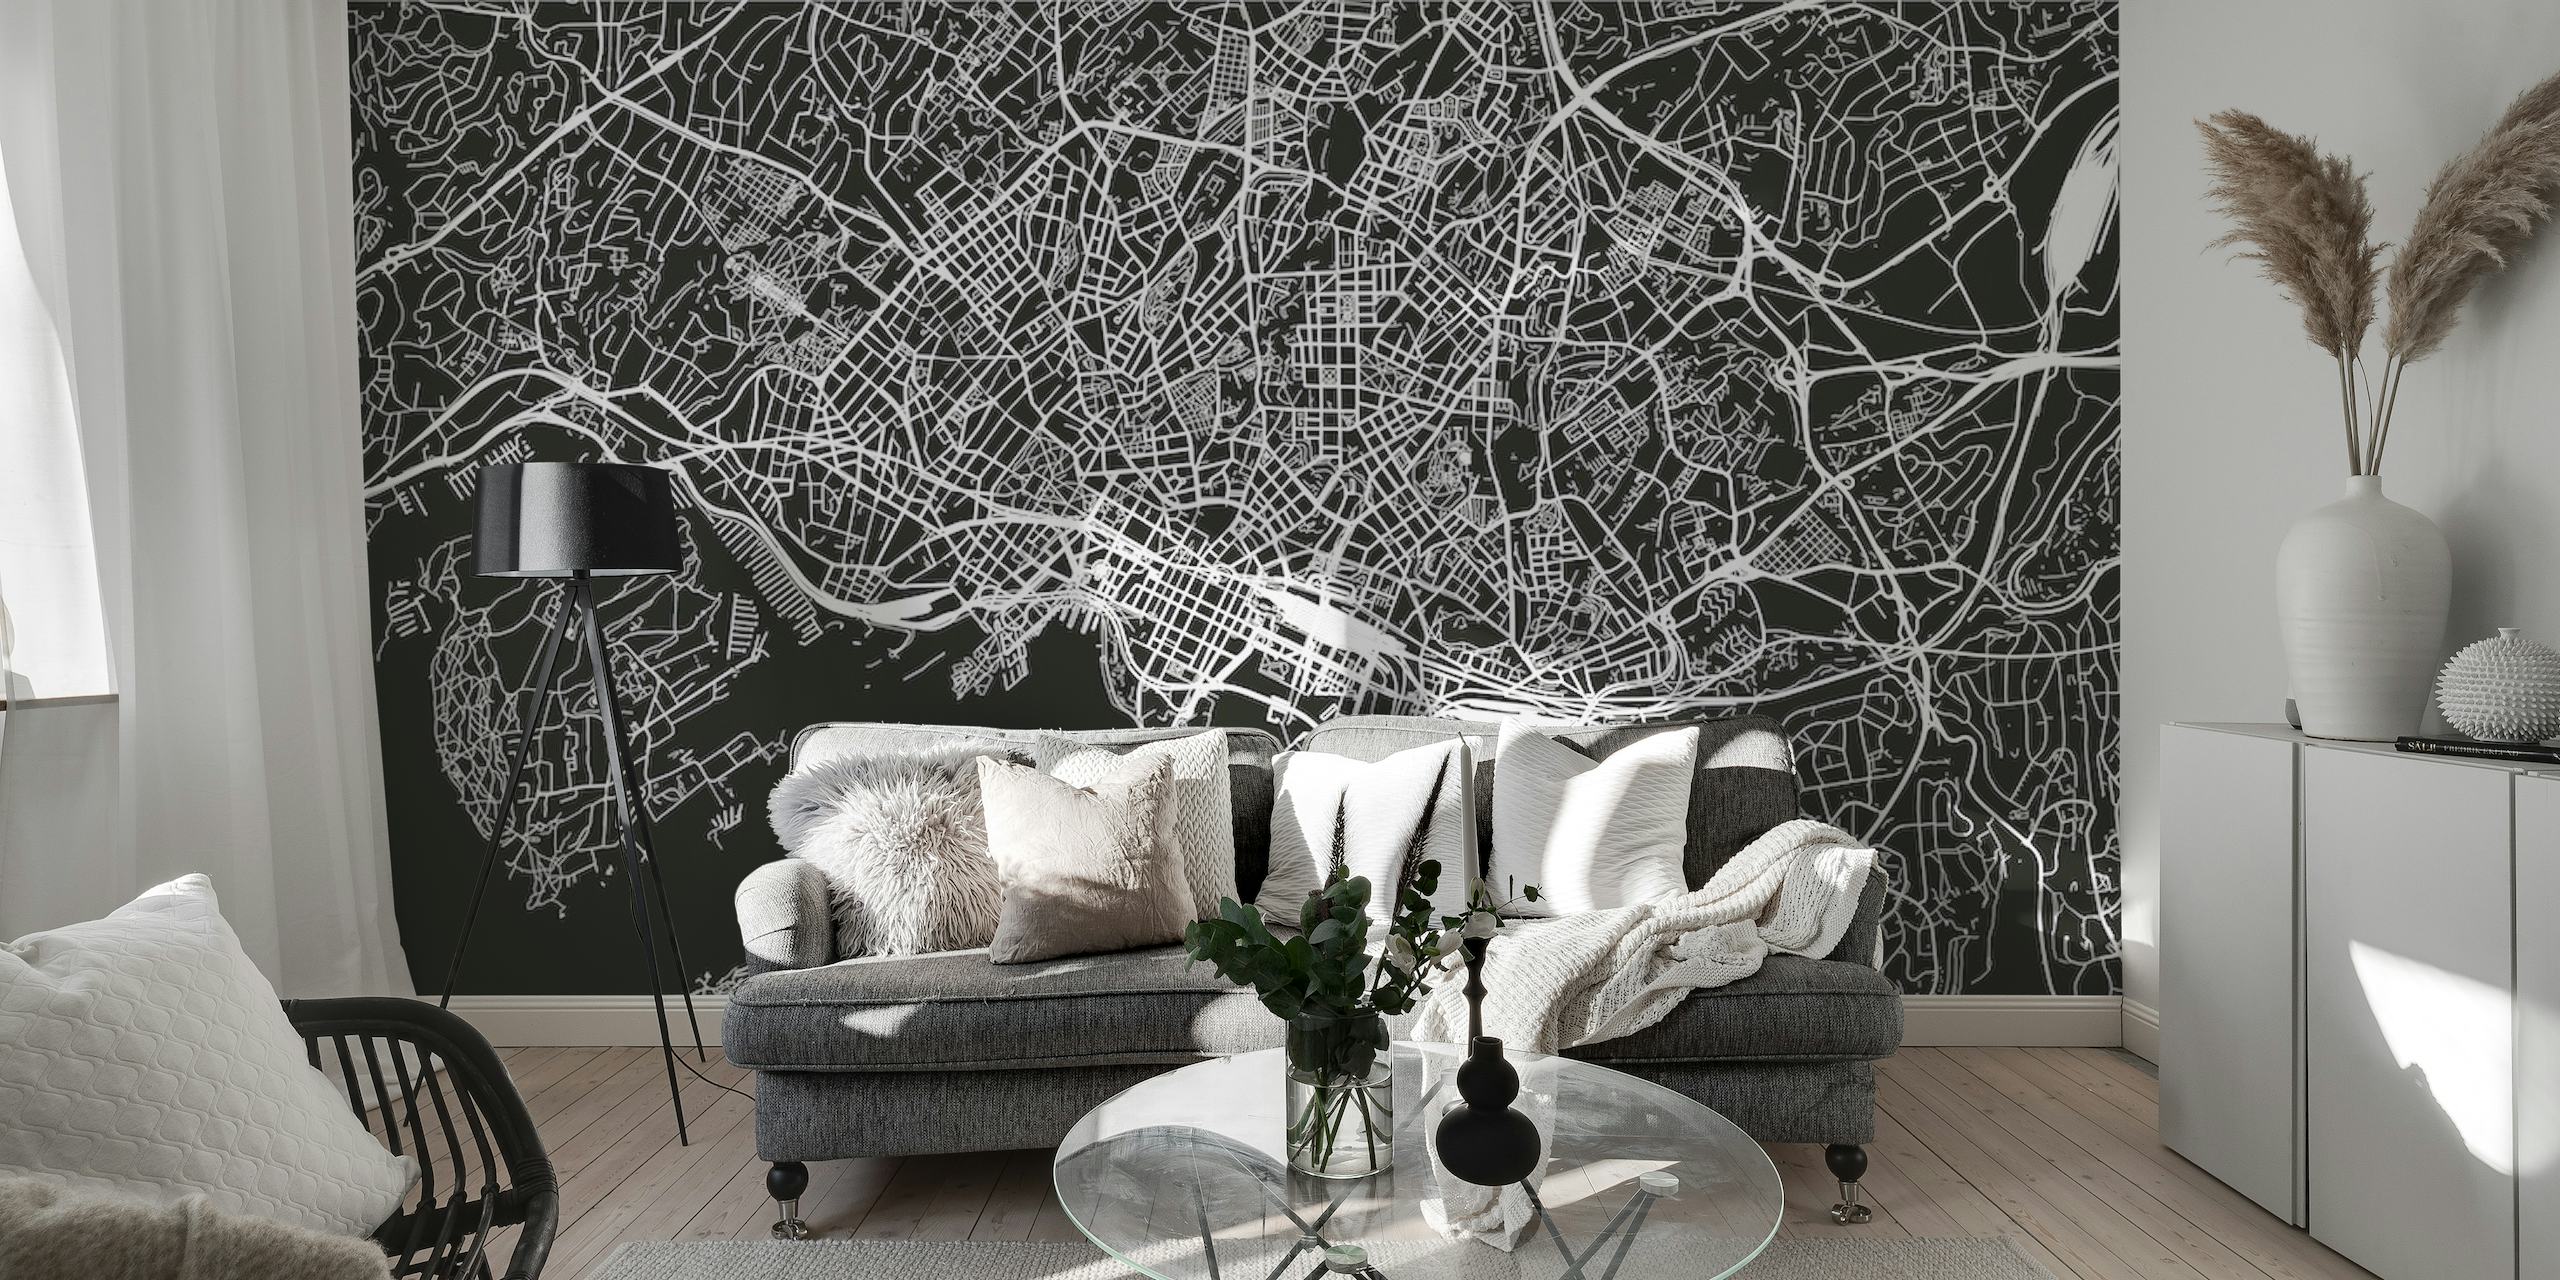 Black and white Oslo city map wall mural